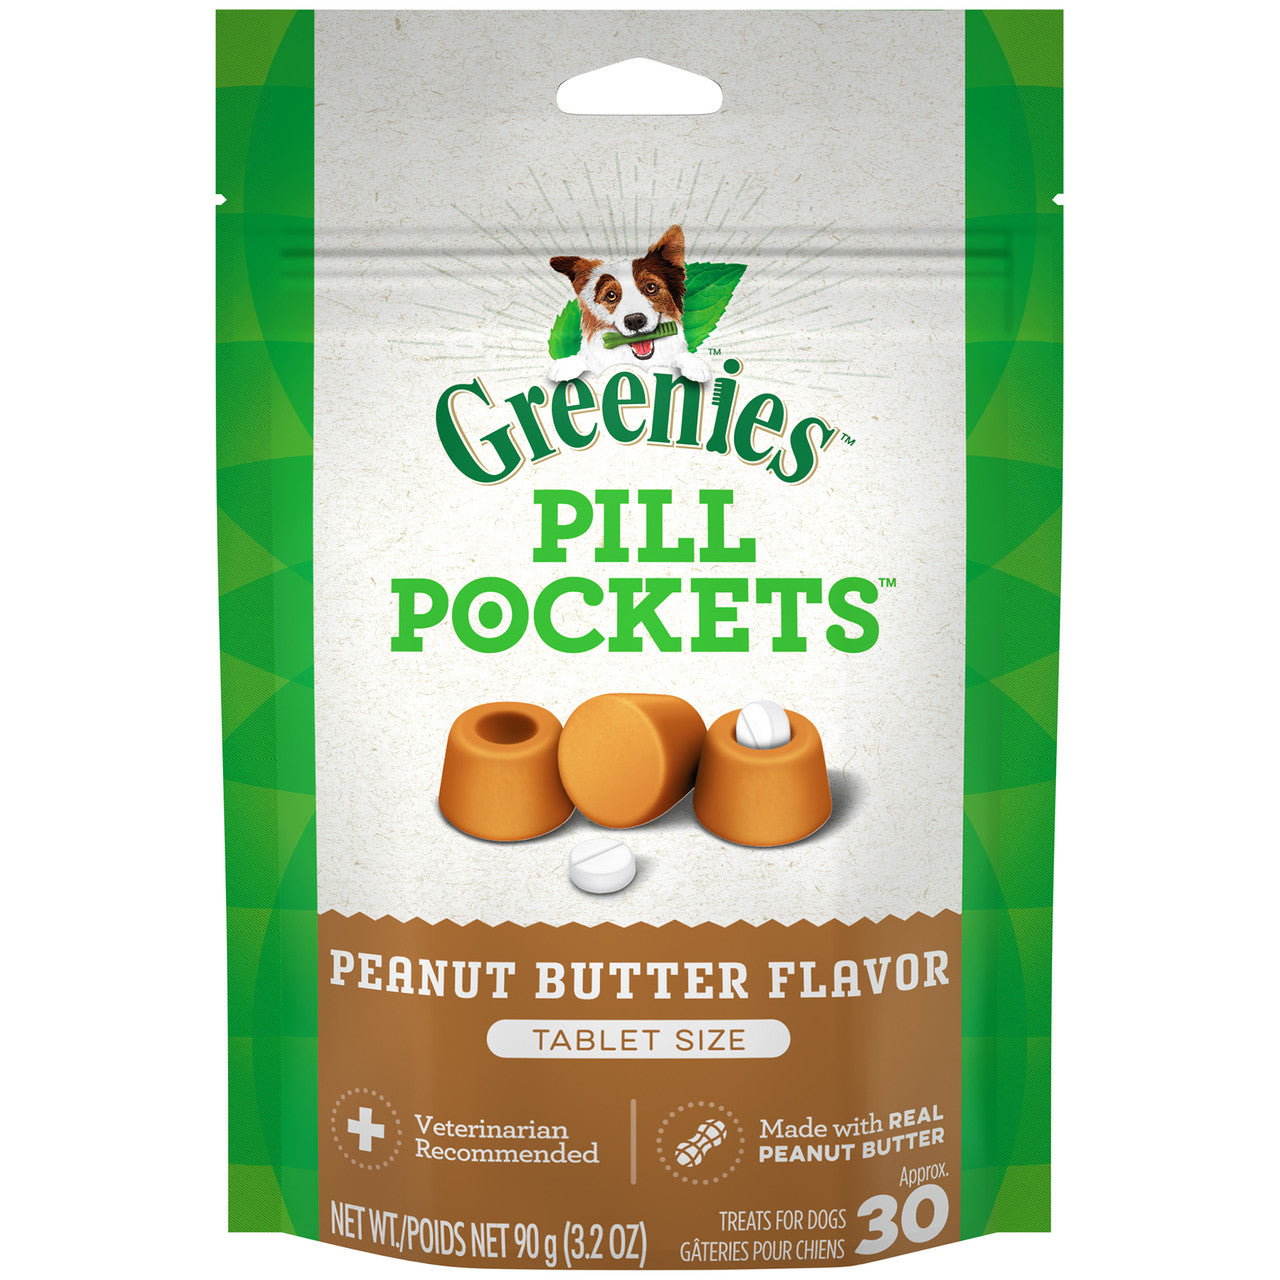 Greenies Pill Pockets for Tablets Peanut Butter 30 Count 3.2 oz